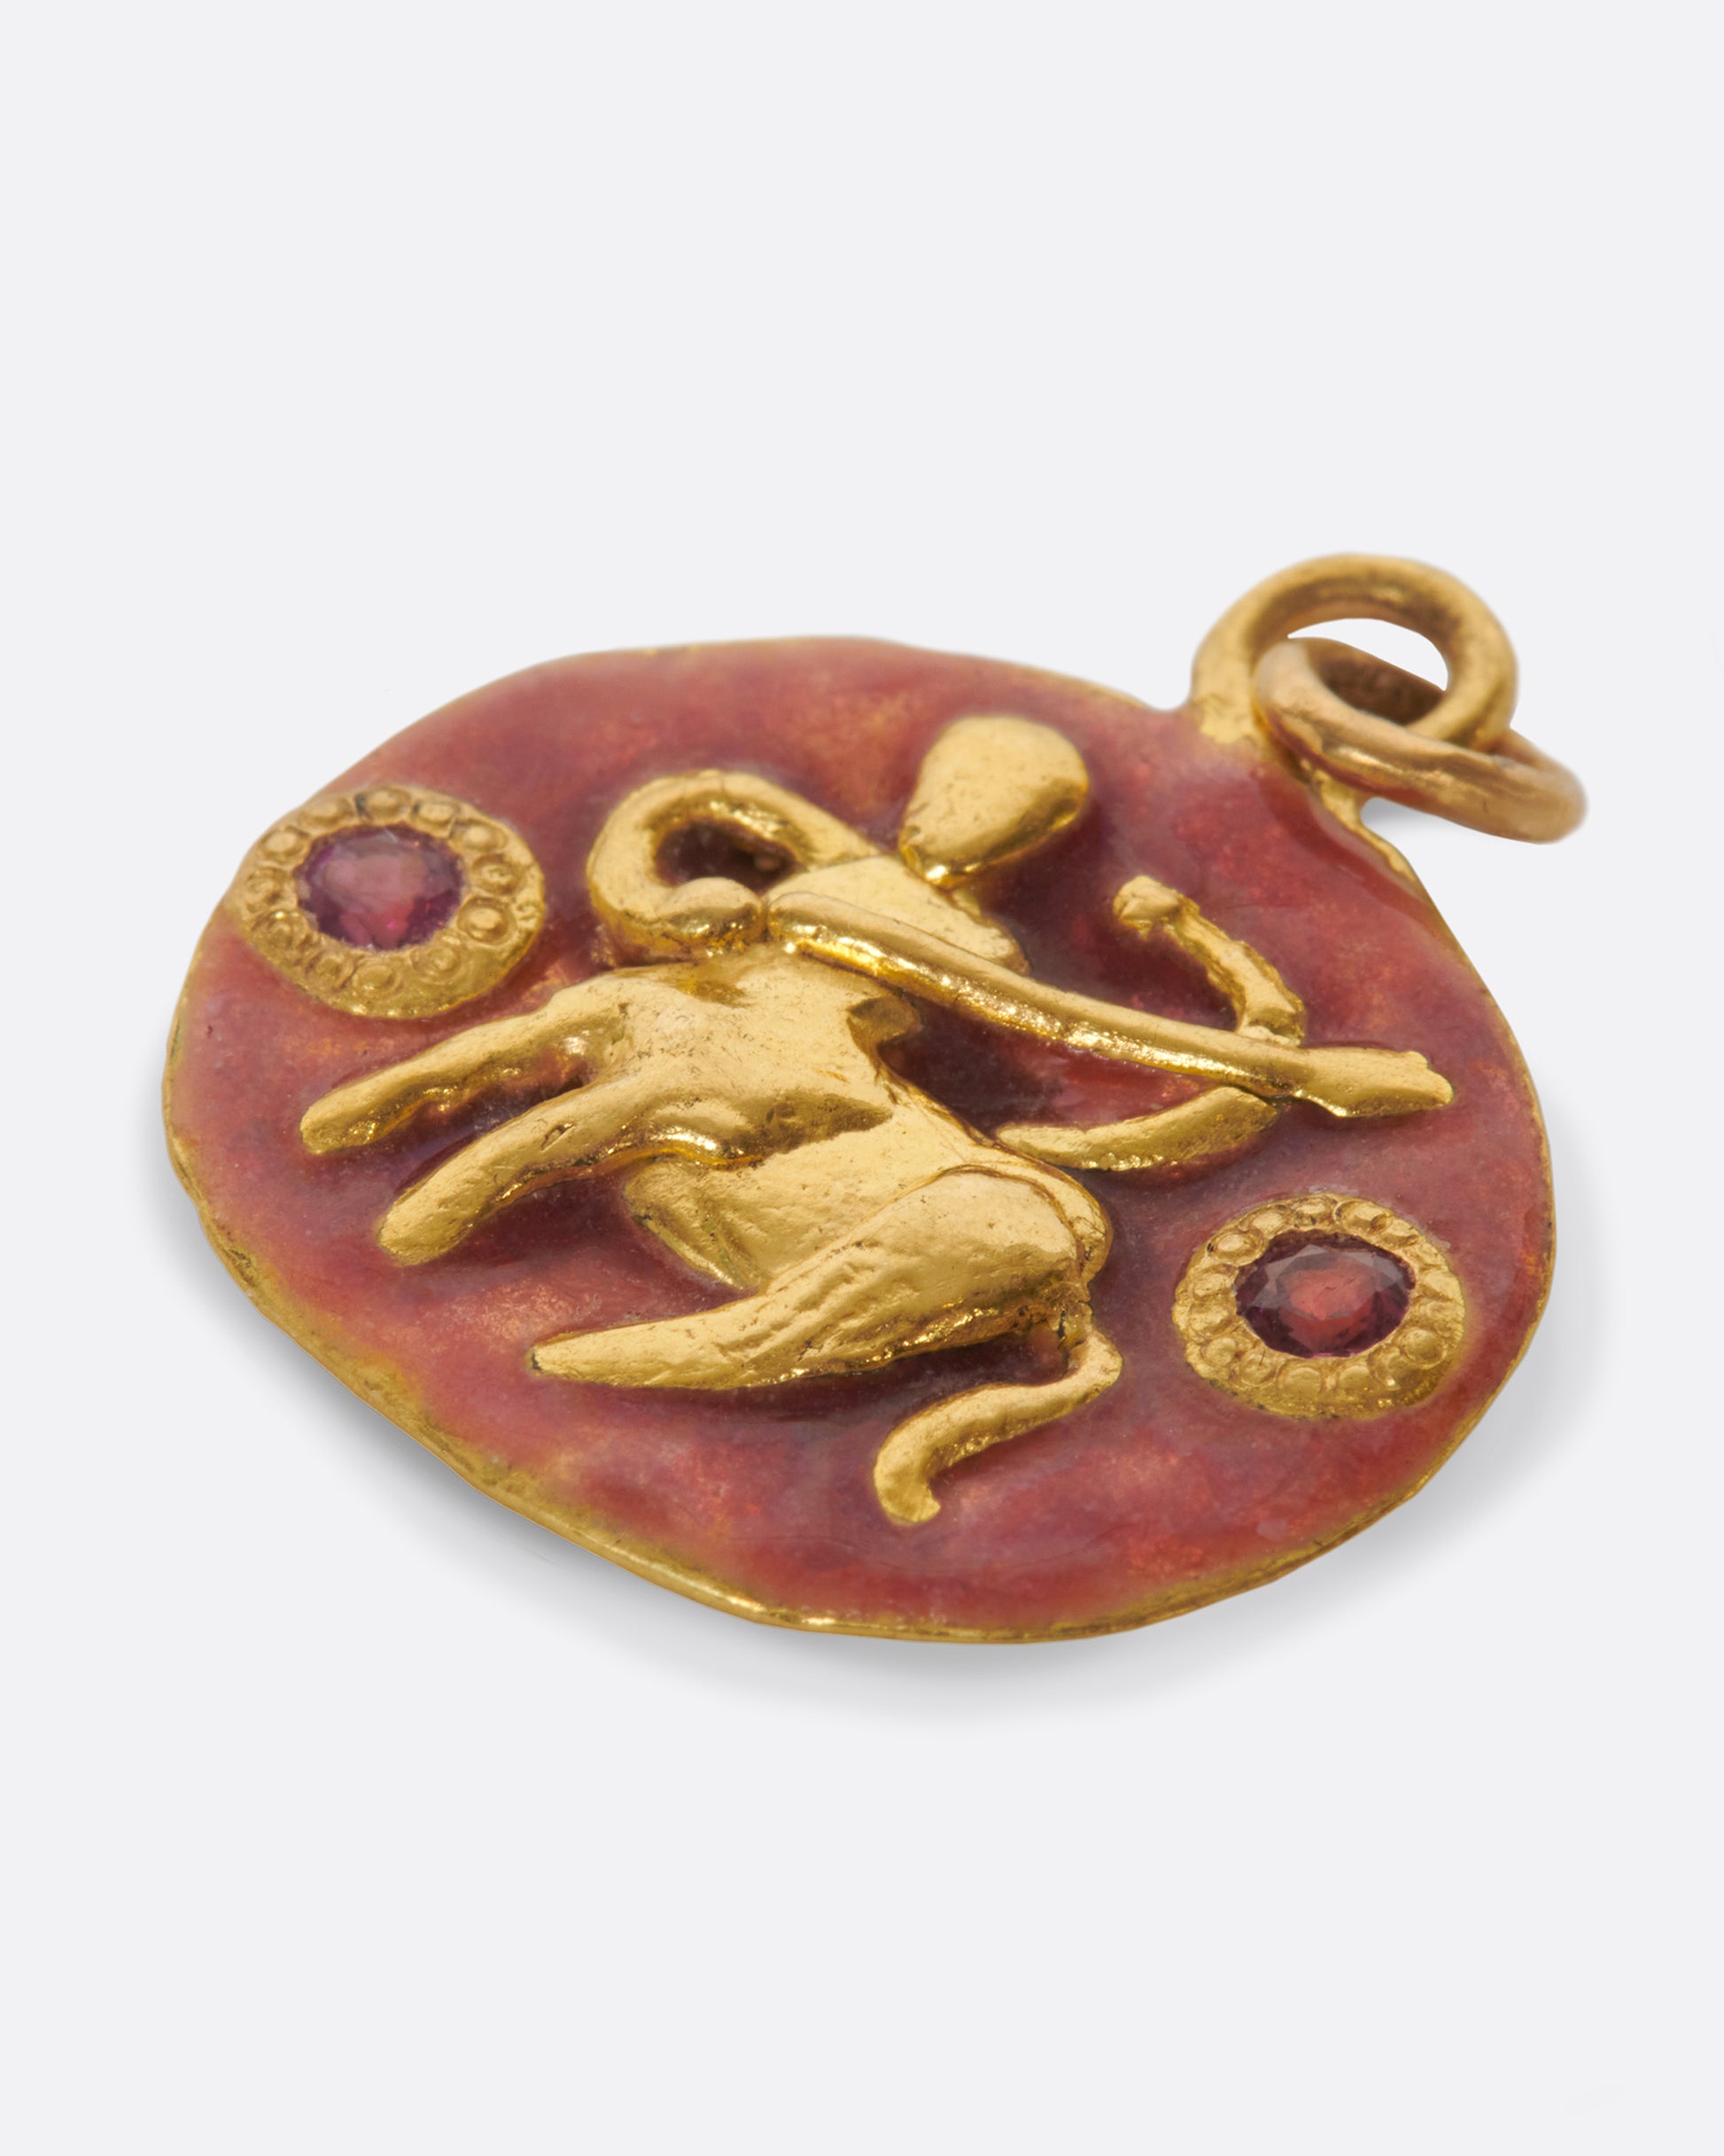 An oval gold pendant with rosy pink enamel and a hand-sculpted Sagittarius icon.